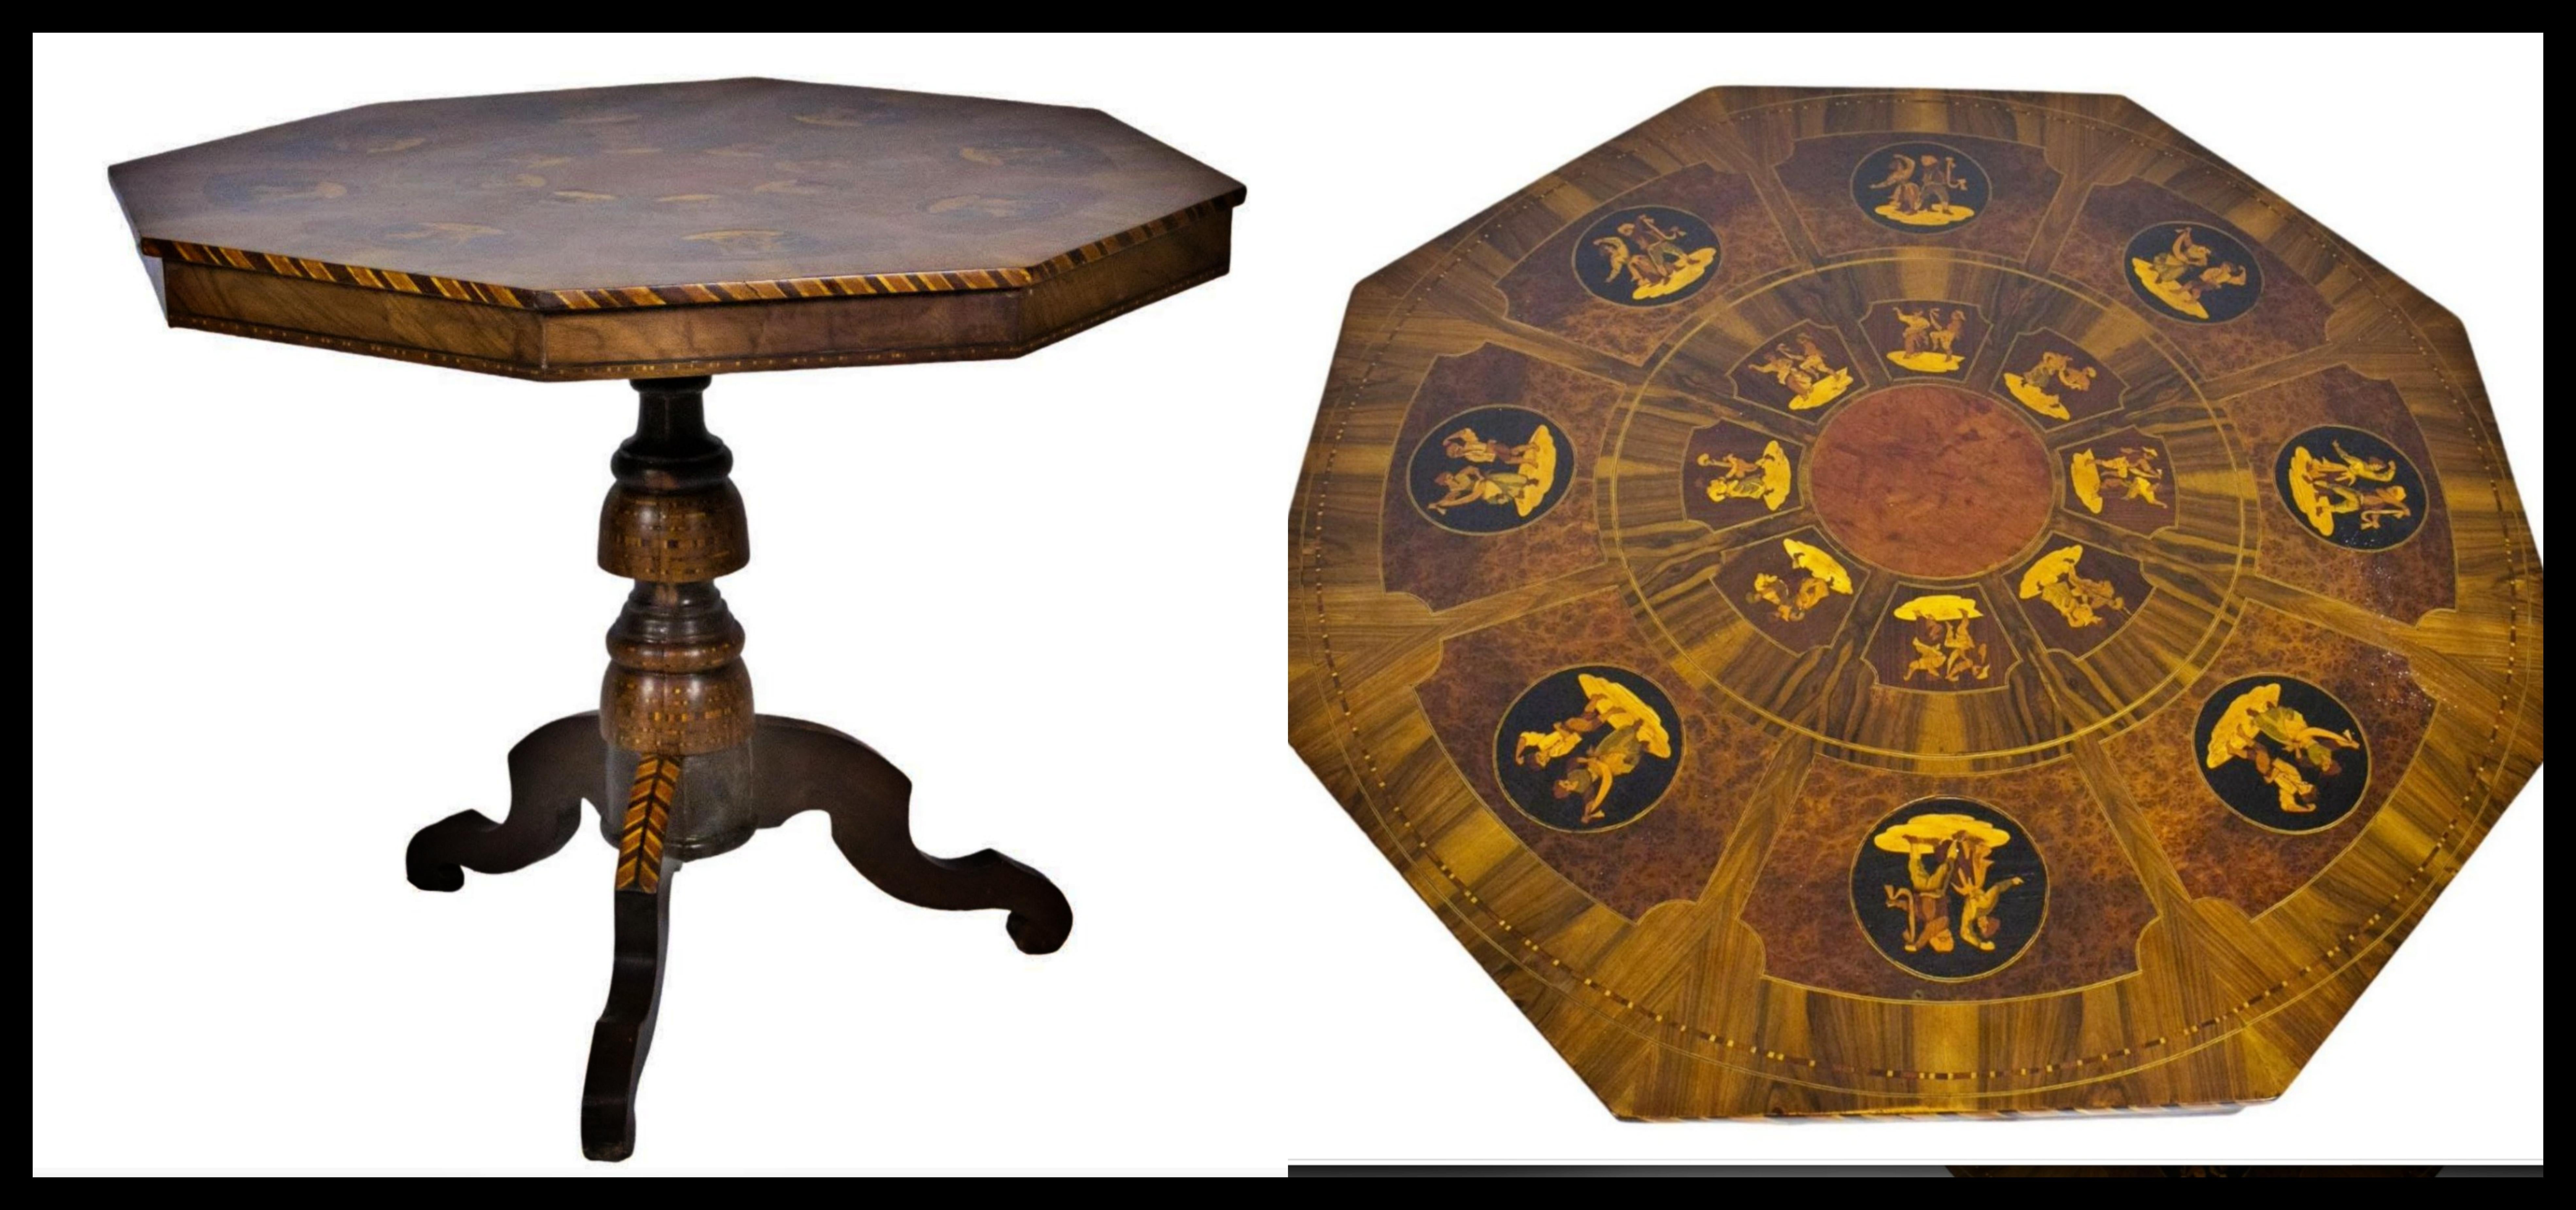 IMPORTANT SORRENTINO TABLE (Sorrento-Naples) 19th Century

octagonal in shape, inlaid in various essences, decorated with inlays depicting dancers in traditional costume inside round reserves, the center presents essence of fruit wood
Gargiulo